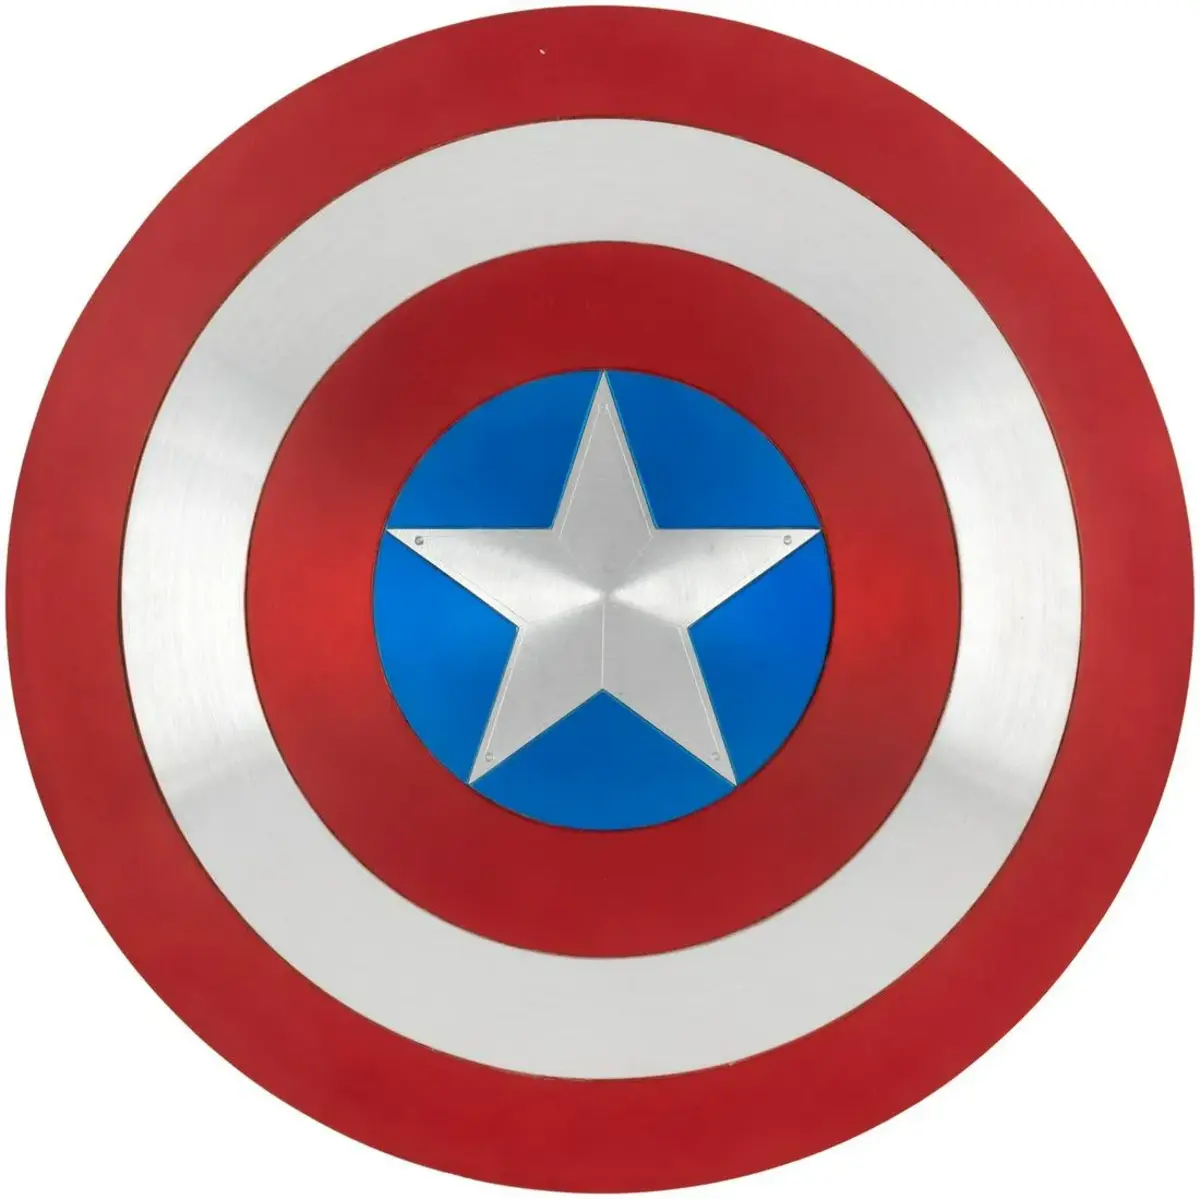 Captain America "hero-prop" shield created by Marvel Studios senior prop master Russell Bobbitt and used by Chris Evans for close-up shots in the 2019 film, "Avengers: Endgame," is one of the most important Marvel film props ever to come to auction. Estimate is $30,000-$50,000.